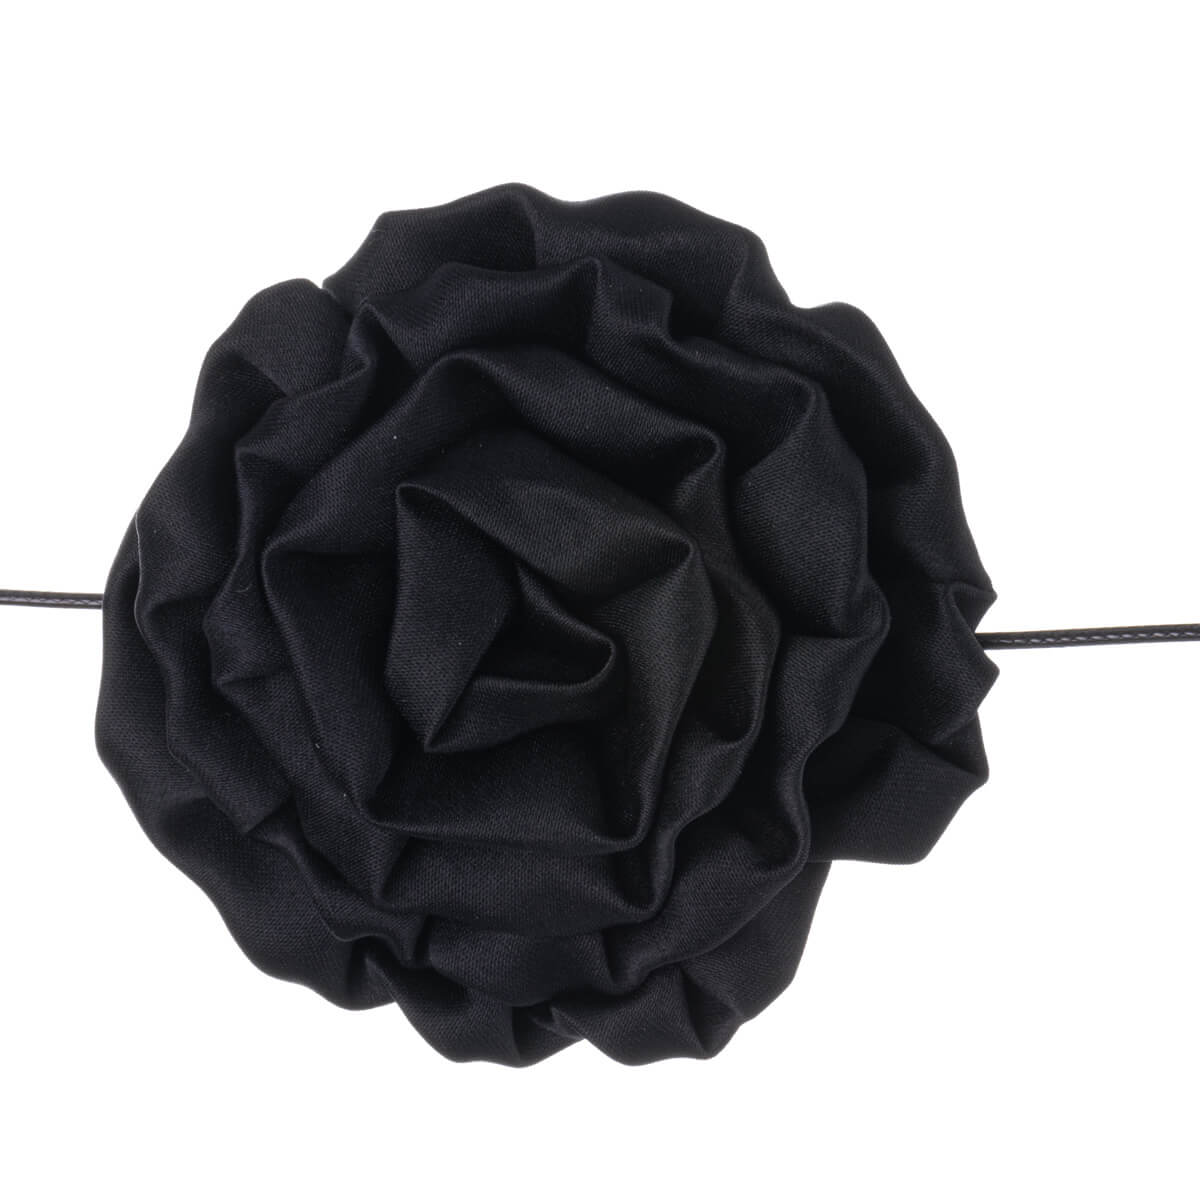 Binding flower choker necklace with cord